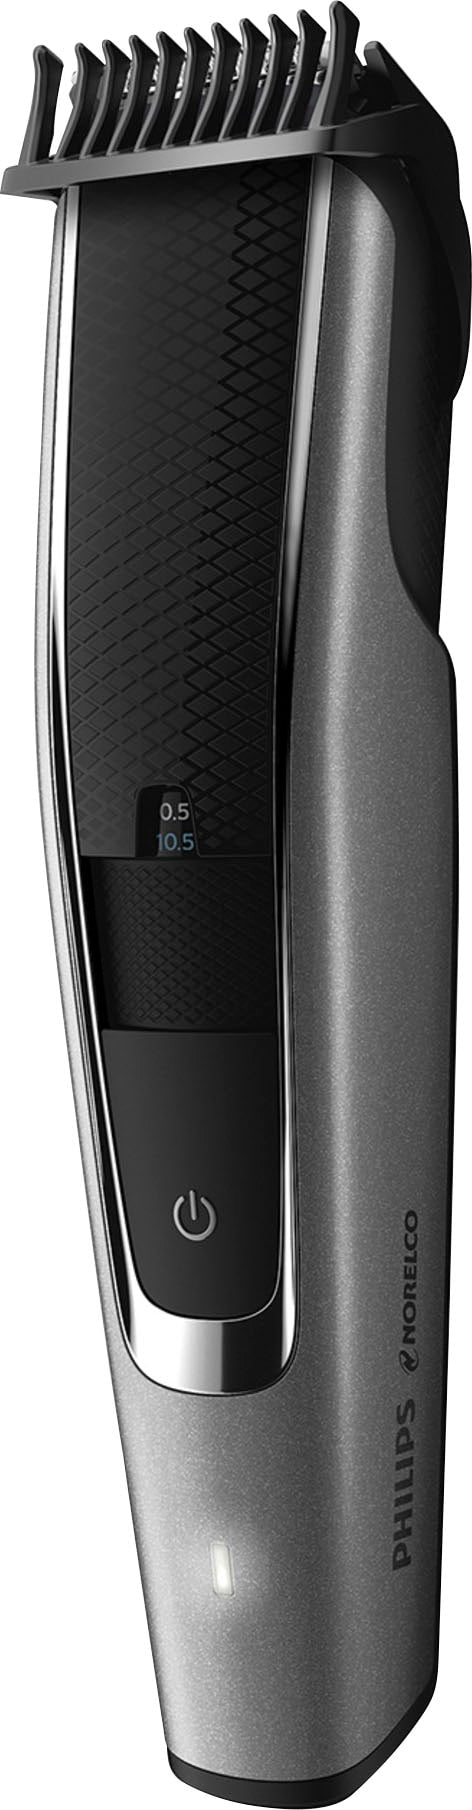 Philips Norelco Beard Trimmer and Hair Clipper Series 5000, BT5502/40 - Black And Silver_3